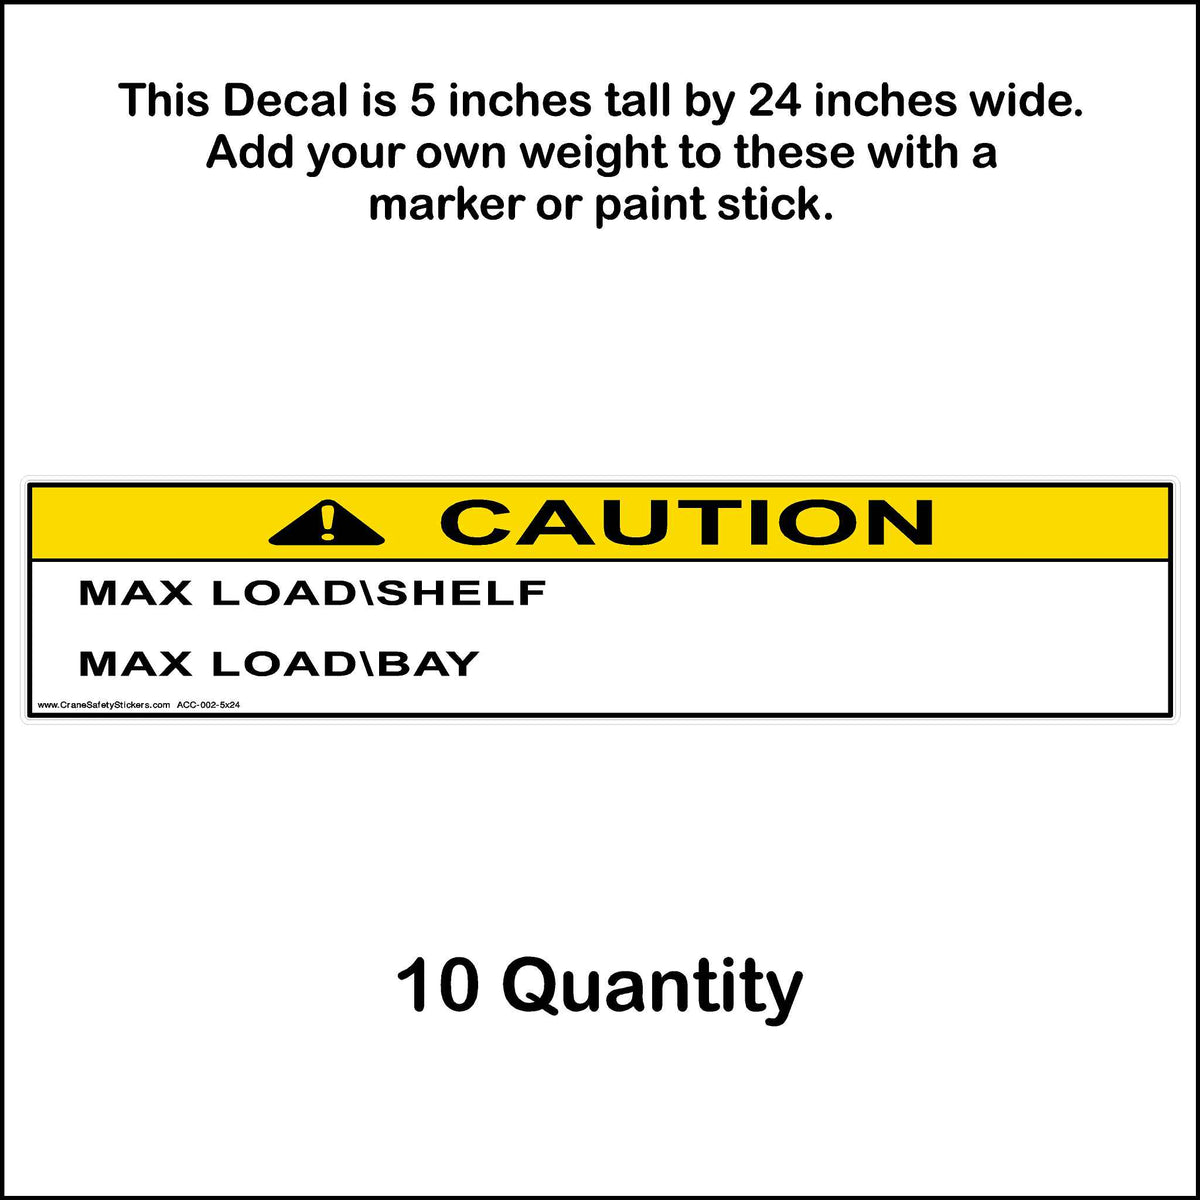 5 inches by 24 inches maximum load shelf and maximum load bay sticker 10 quantity.